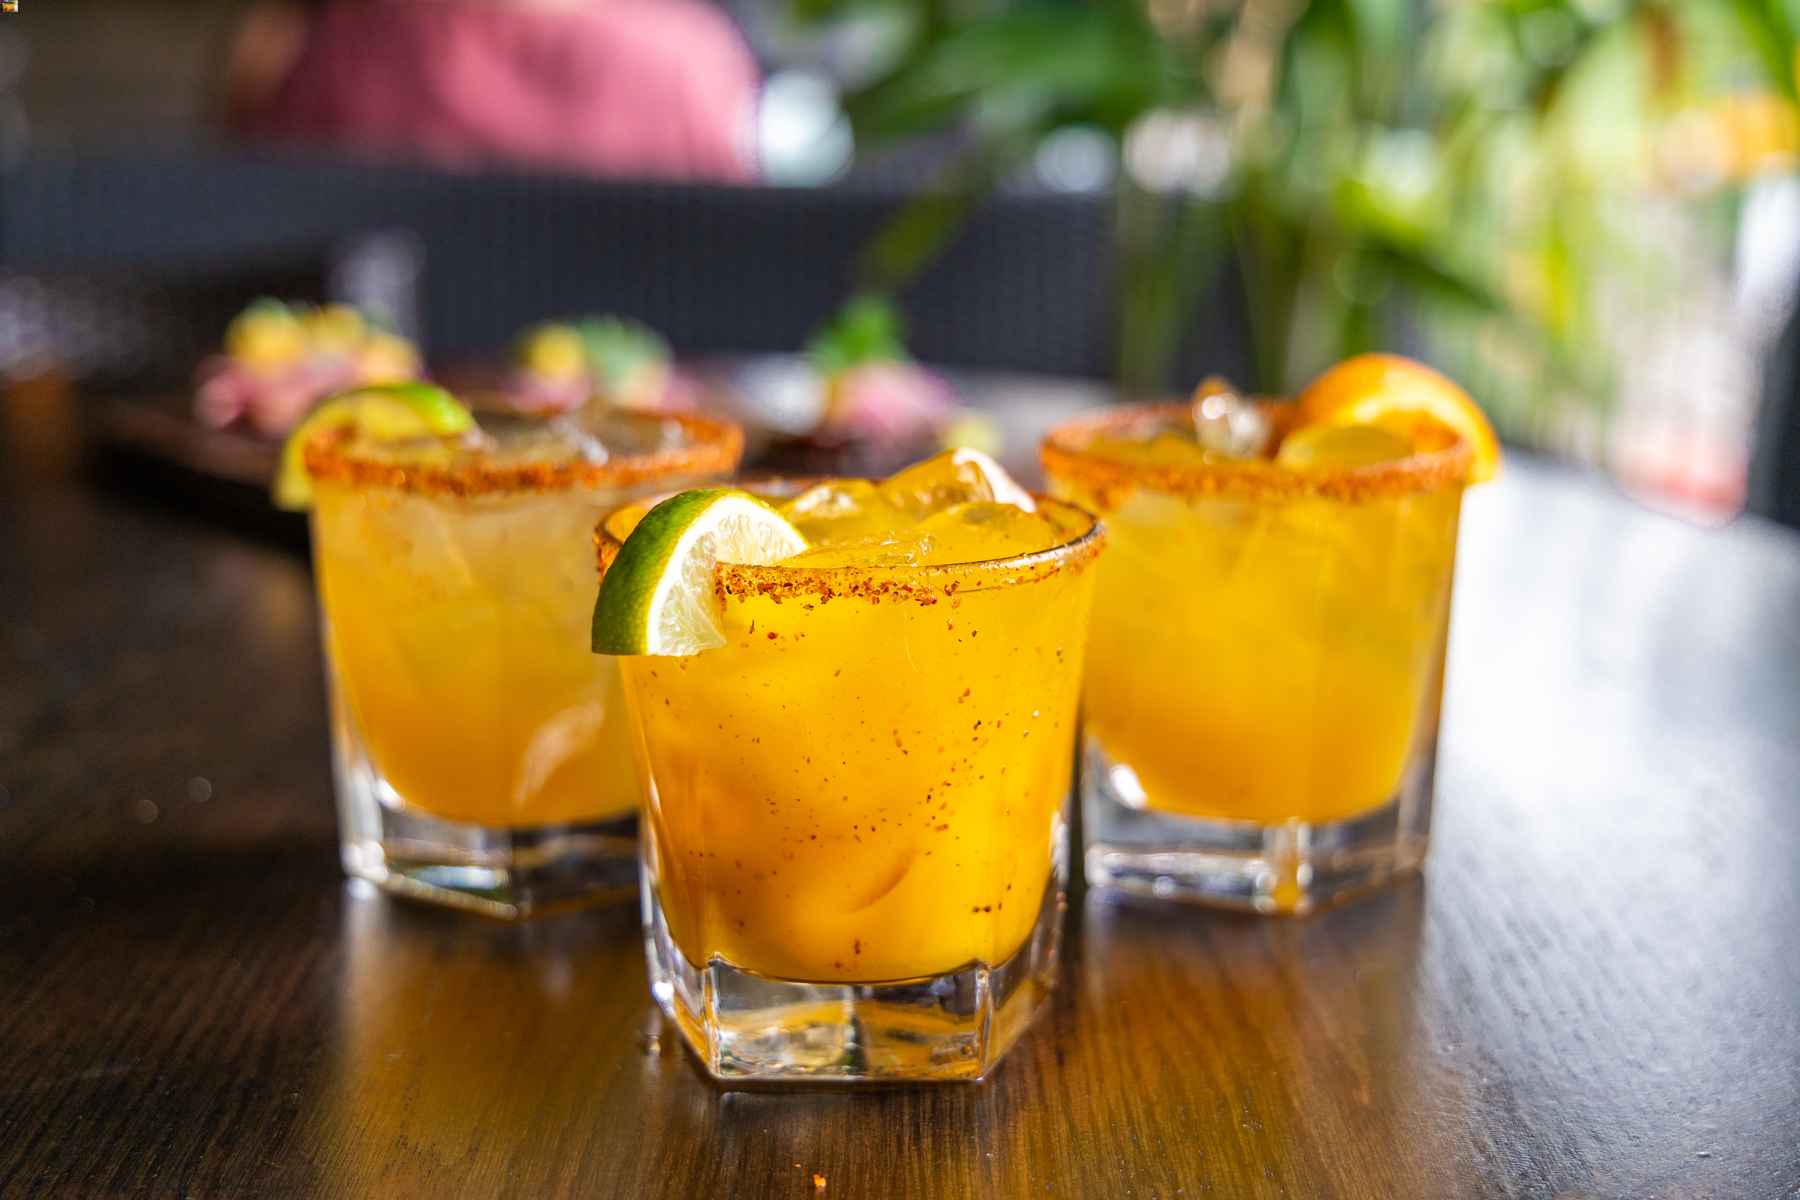 Bright orange ocktails in glasses rimmed with chile powder and garnished by lime and orange slices.